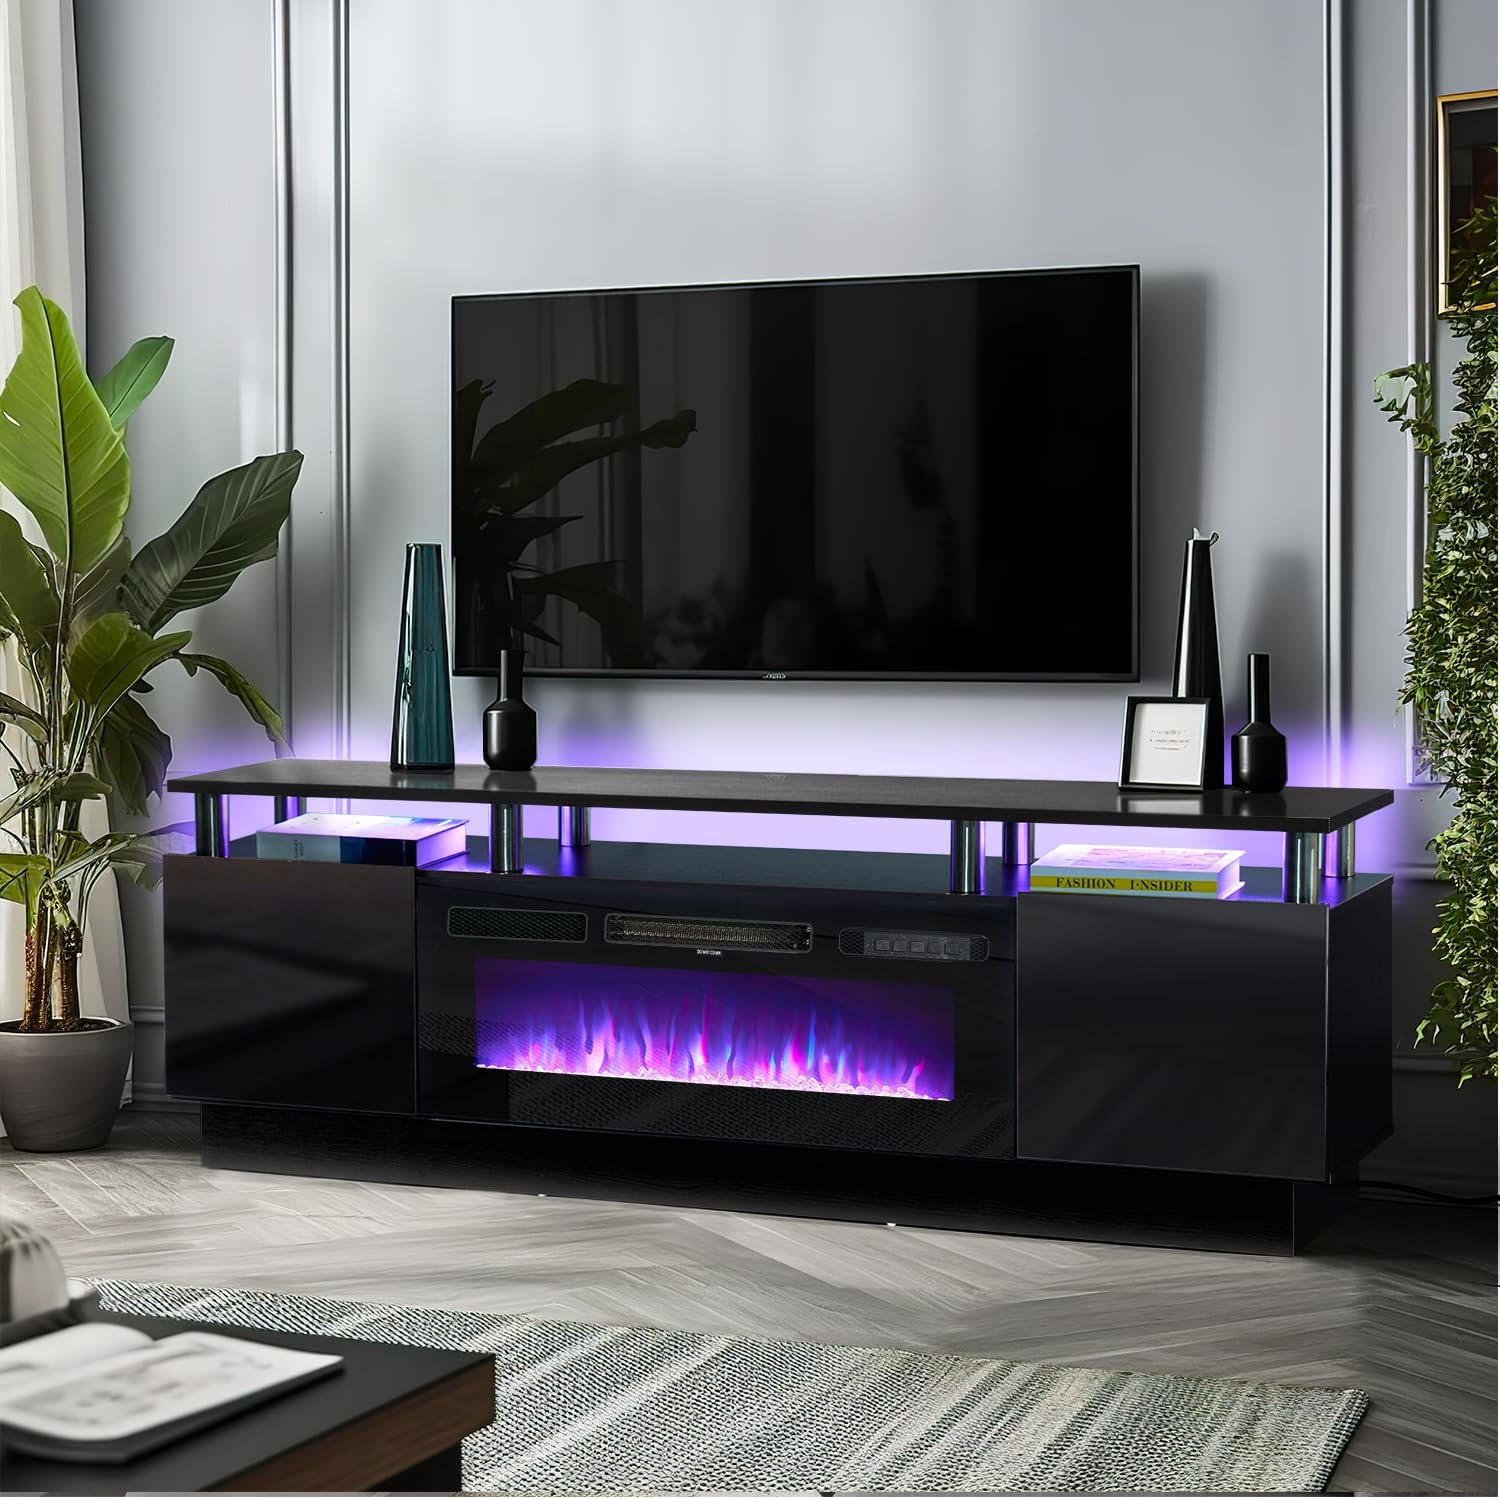 oneinmil-fireplace-tv-stand-with-36-electric-fireplace-2-tier-tv-console-stand-for-tvs-up-to-90-led-light-entertainment-center-fireplace-for-the-living-room-tv-stand-black